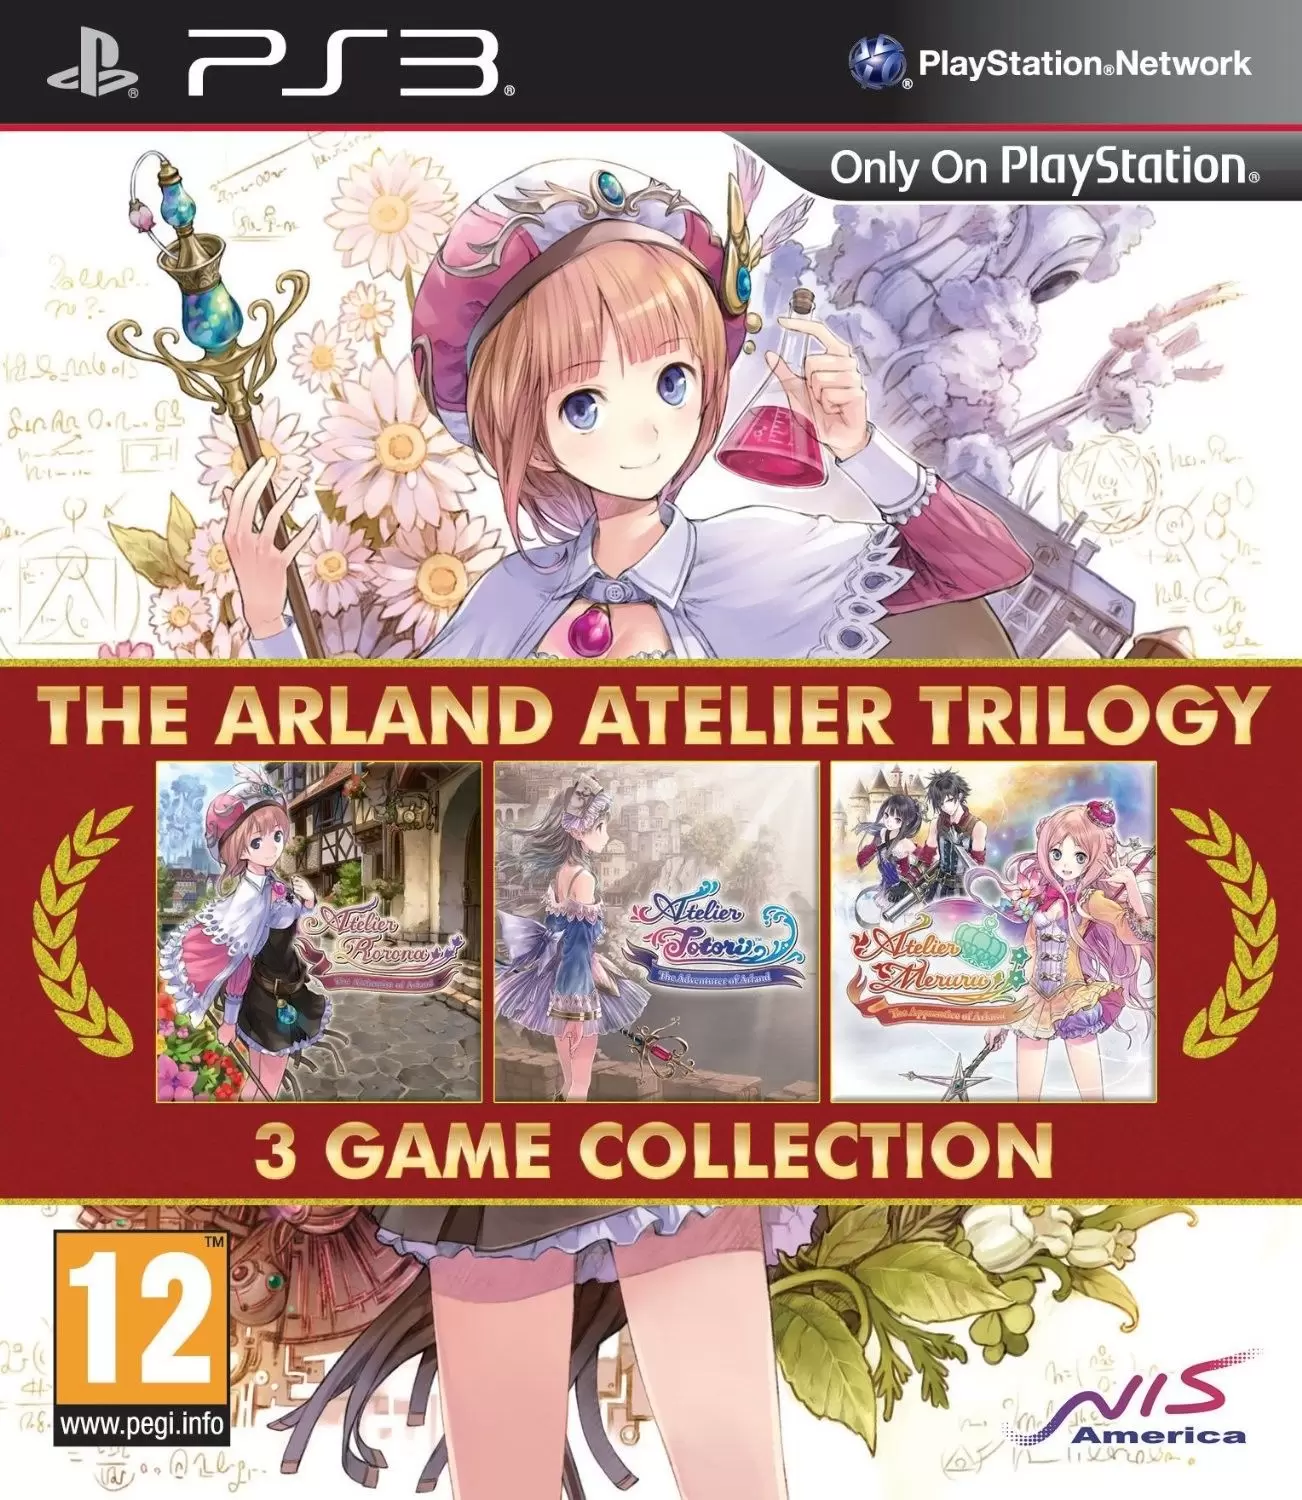 PS3 Games - The Arland Atelier Trilogy